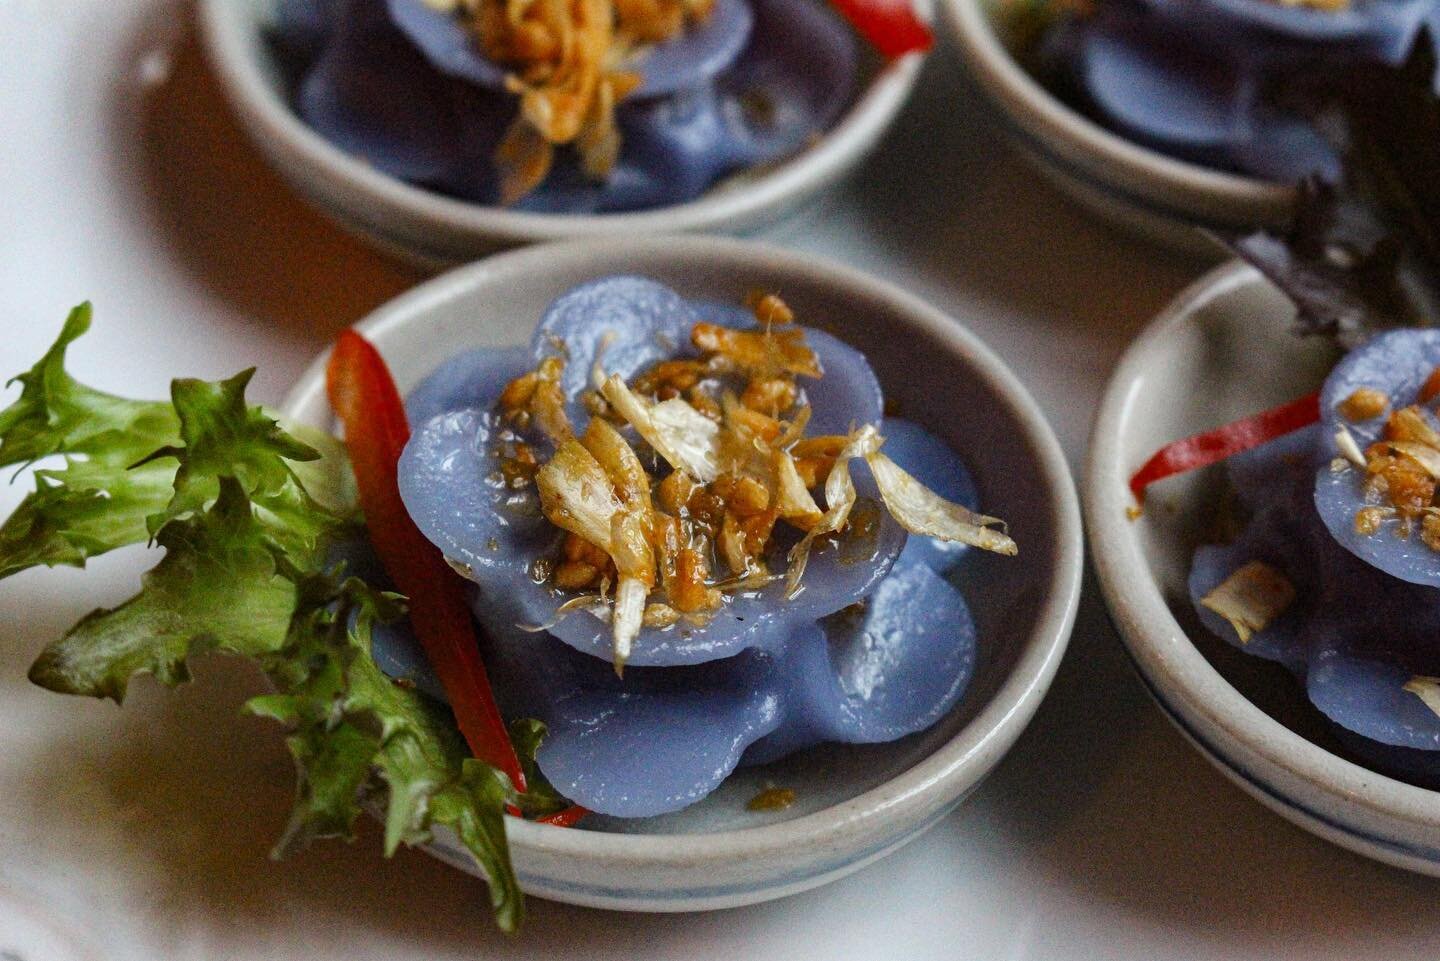 Feast your eyes on this gorgeous little dish!

Shaw Muang brings you minced chicken inside a warm radish dumpling, and is topped with crispy garlic. Unless you decide it&rsquo;s too beautiful to eat, you won&rsquo;t regret the flavors it brings to yo